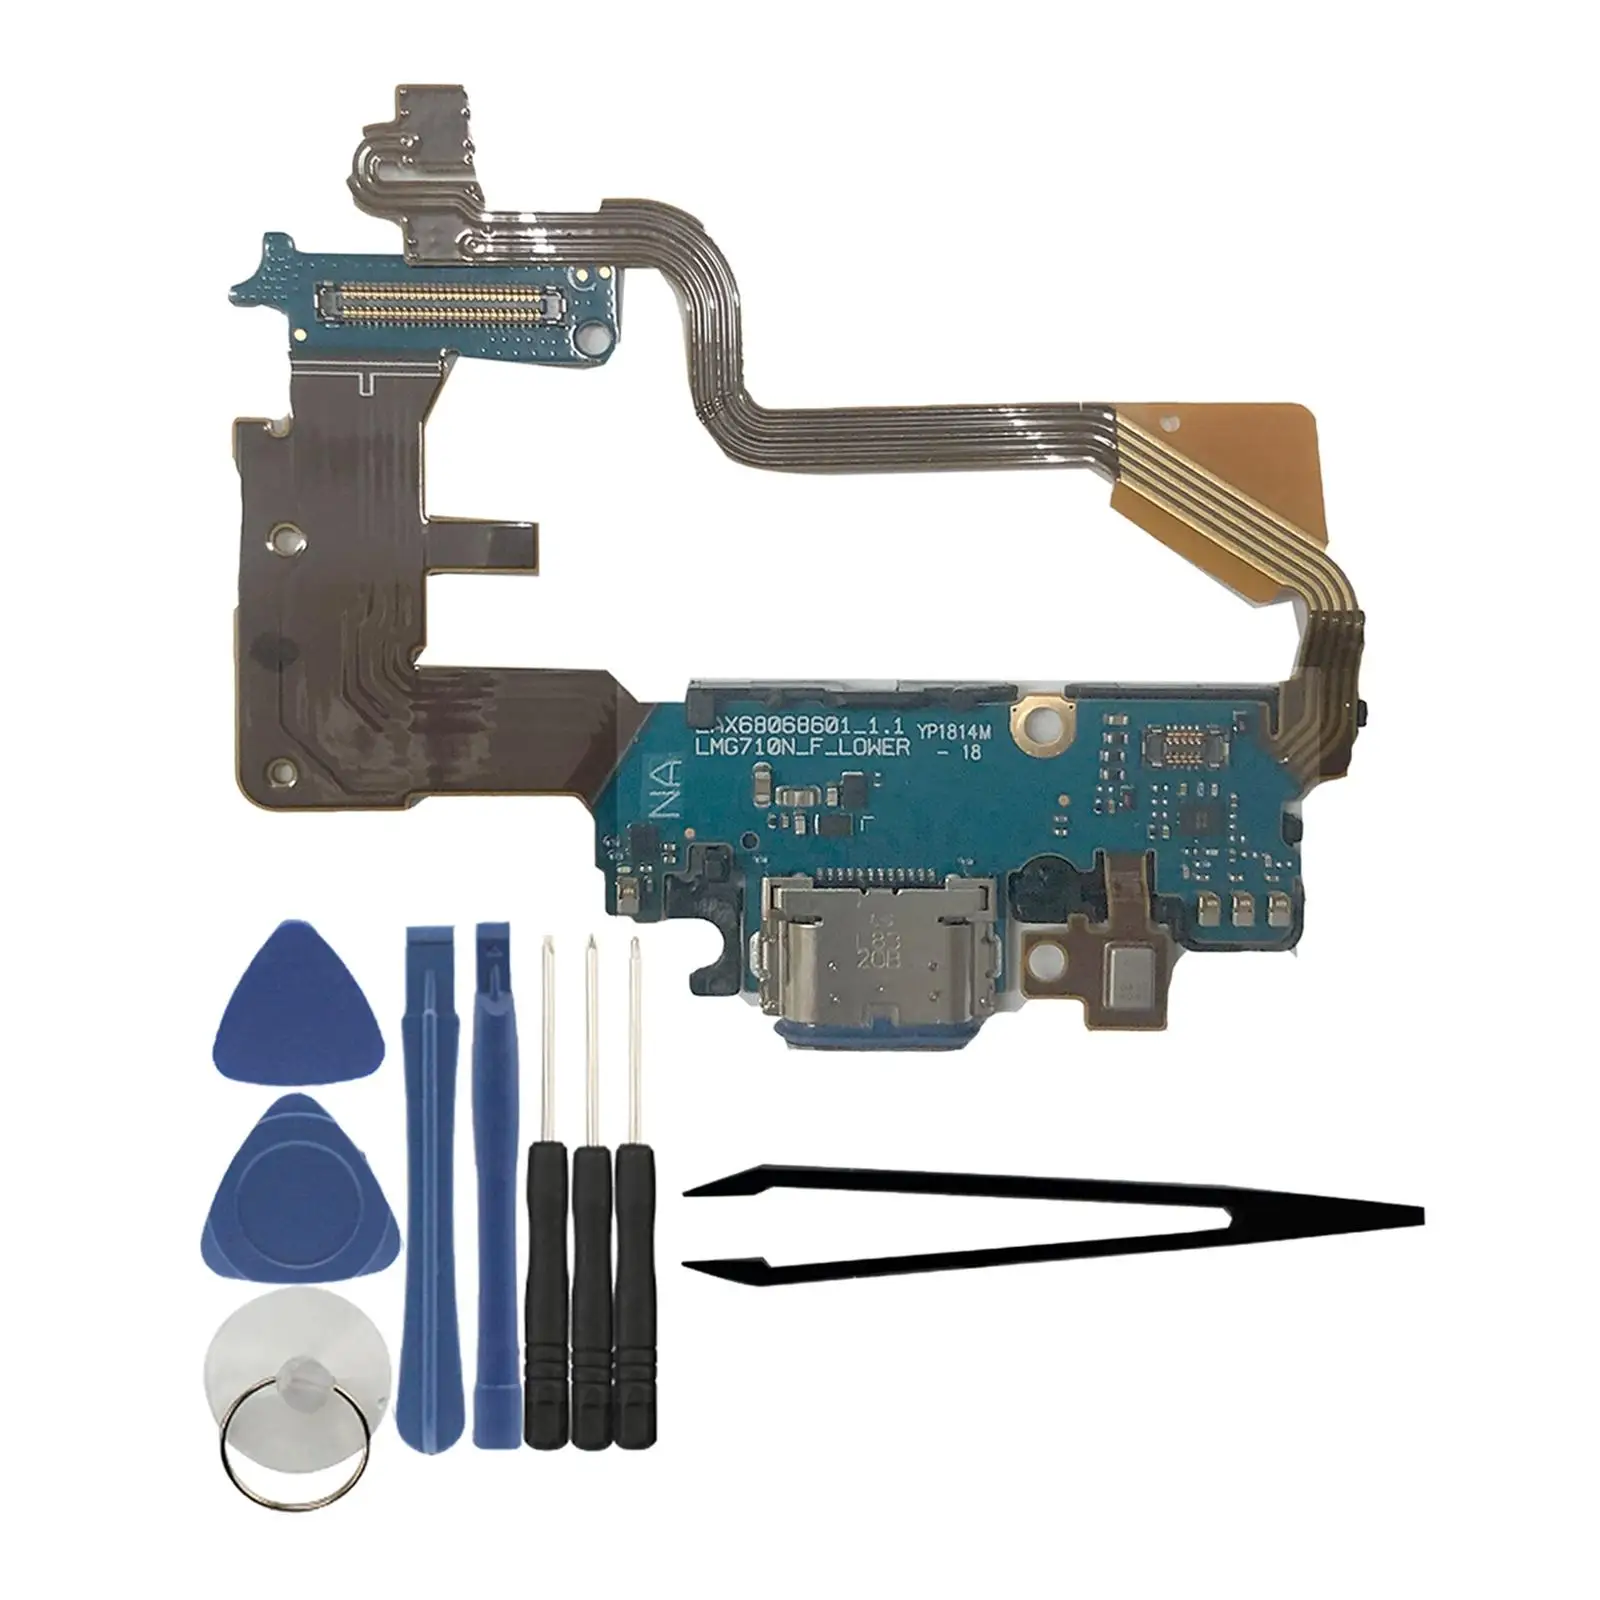 USB Charging Port Connector Assembly for LG G7 ThinQ Charging Port Tools